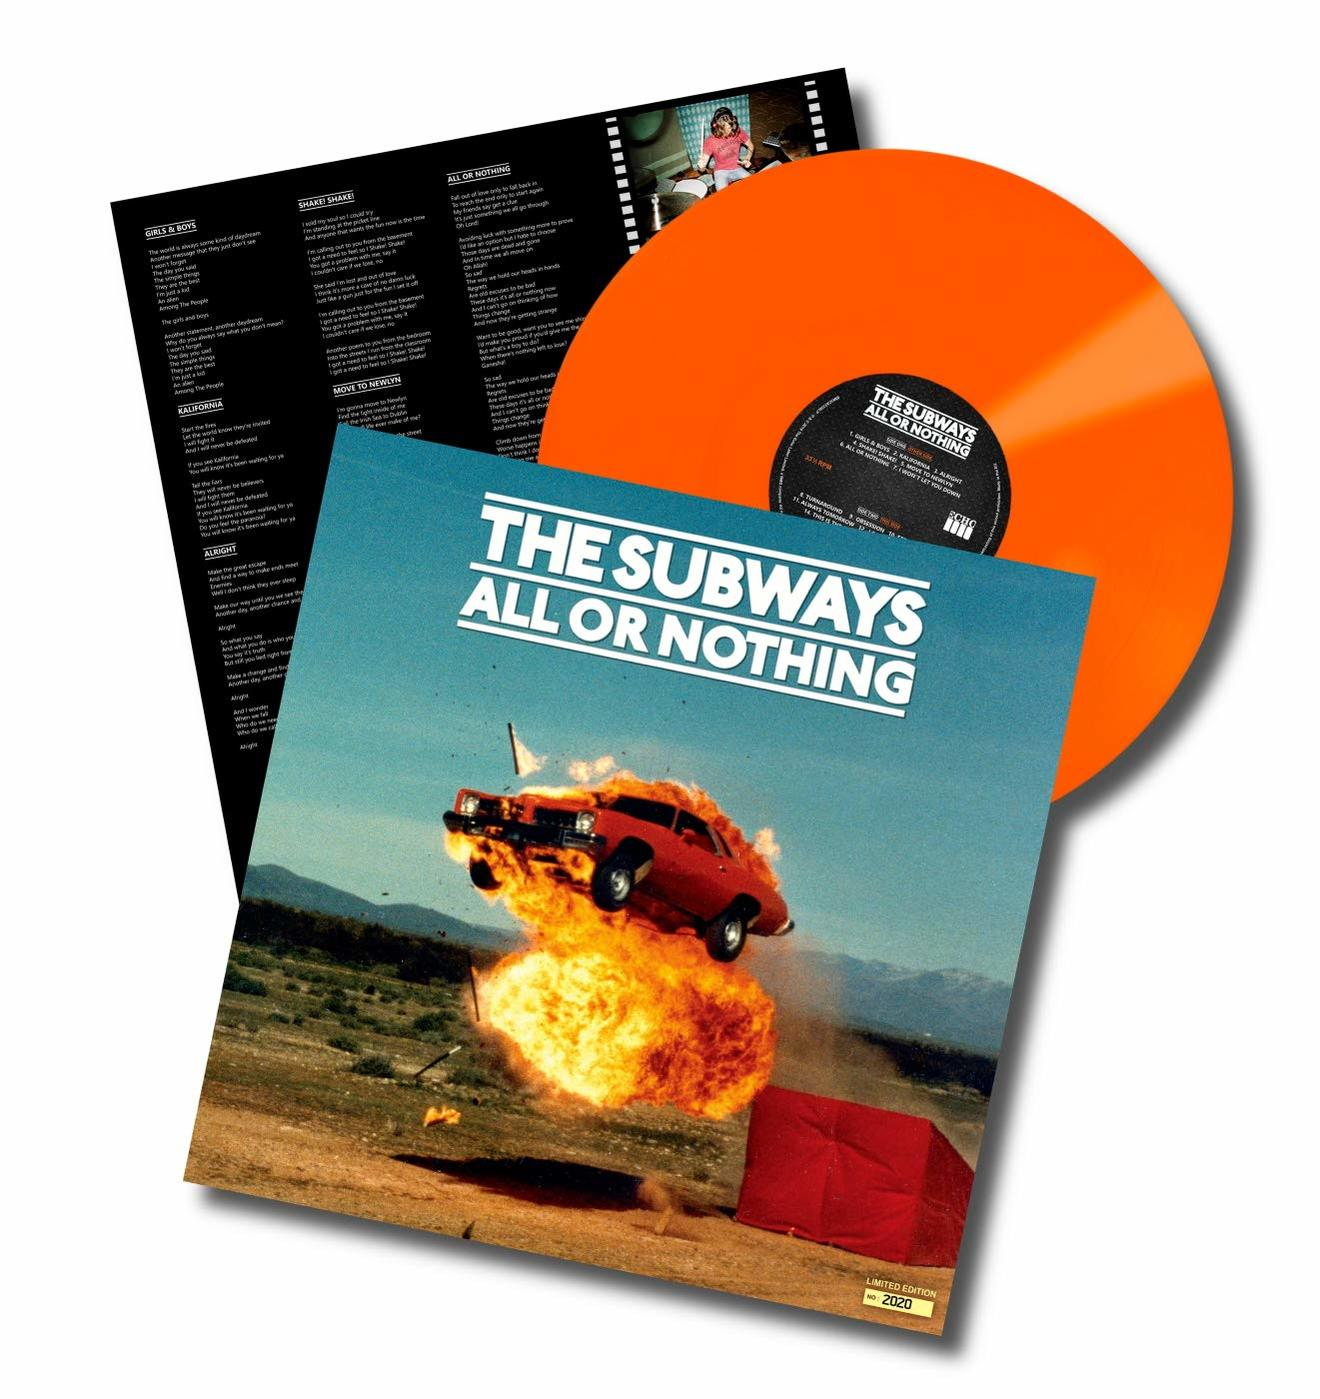 - (ANNIVERSARY Subways - NOTHING (Vinyl) The EDITION) OR ALL